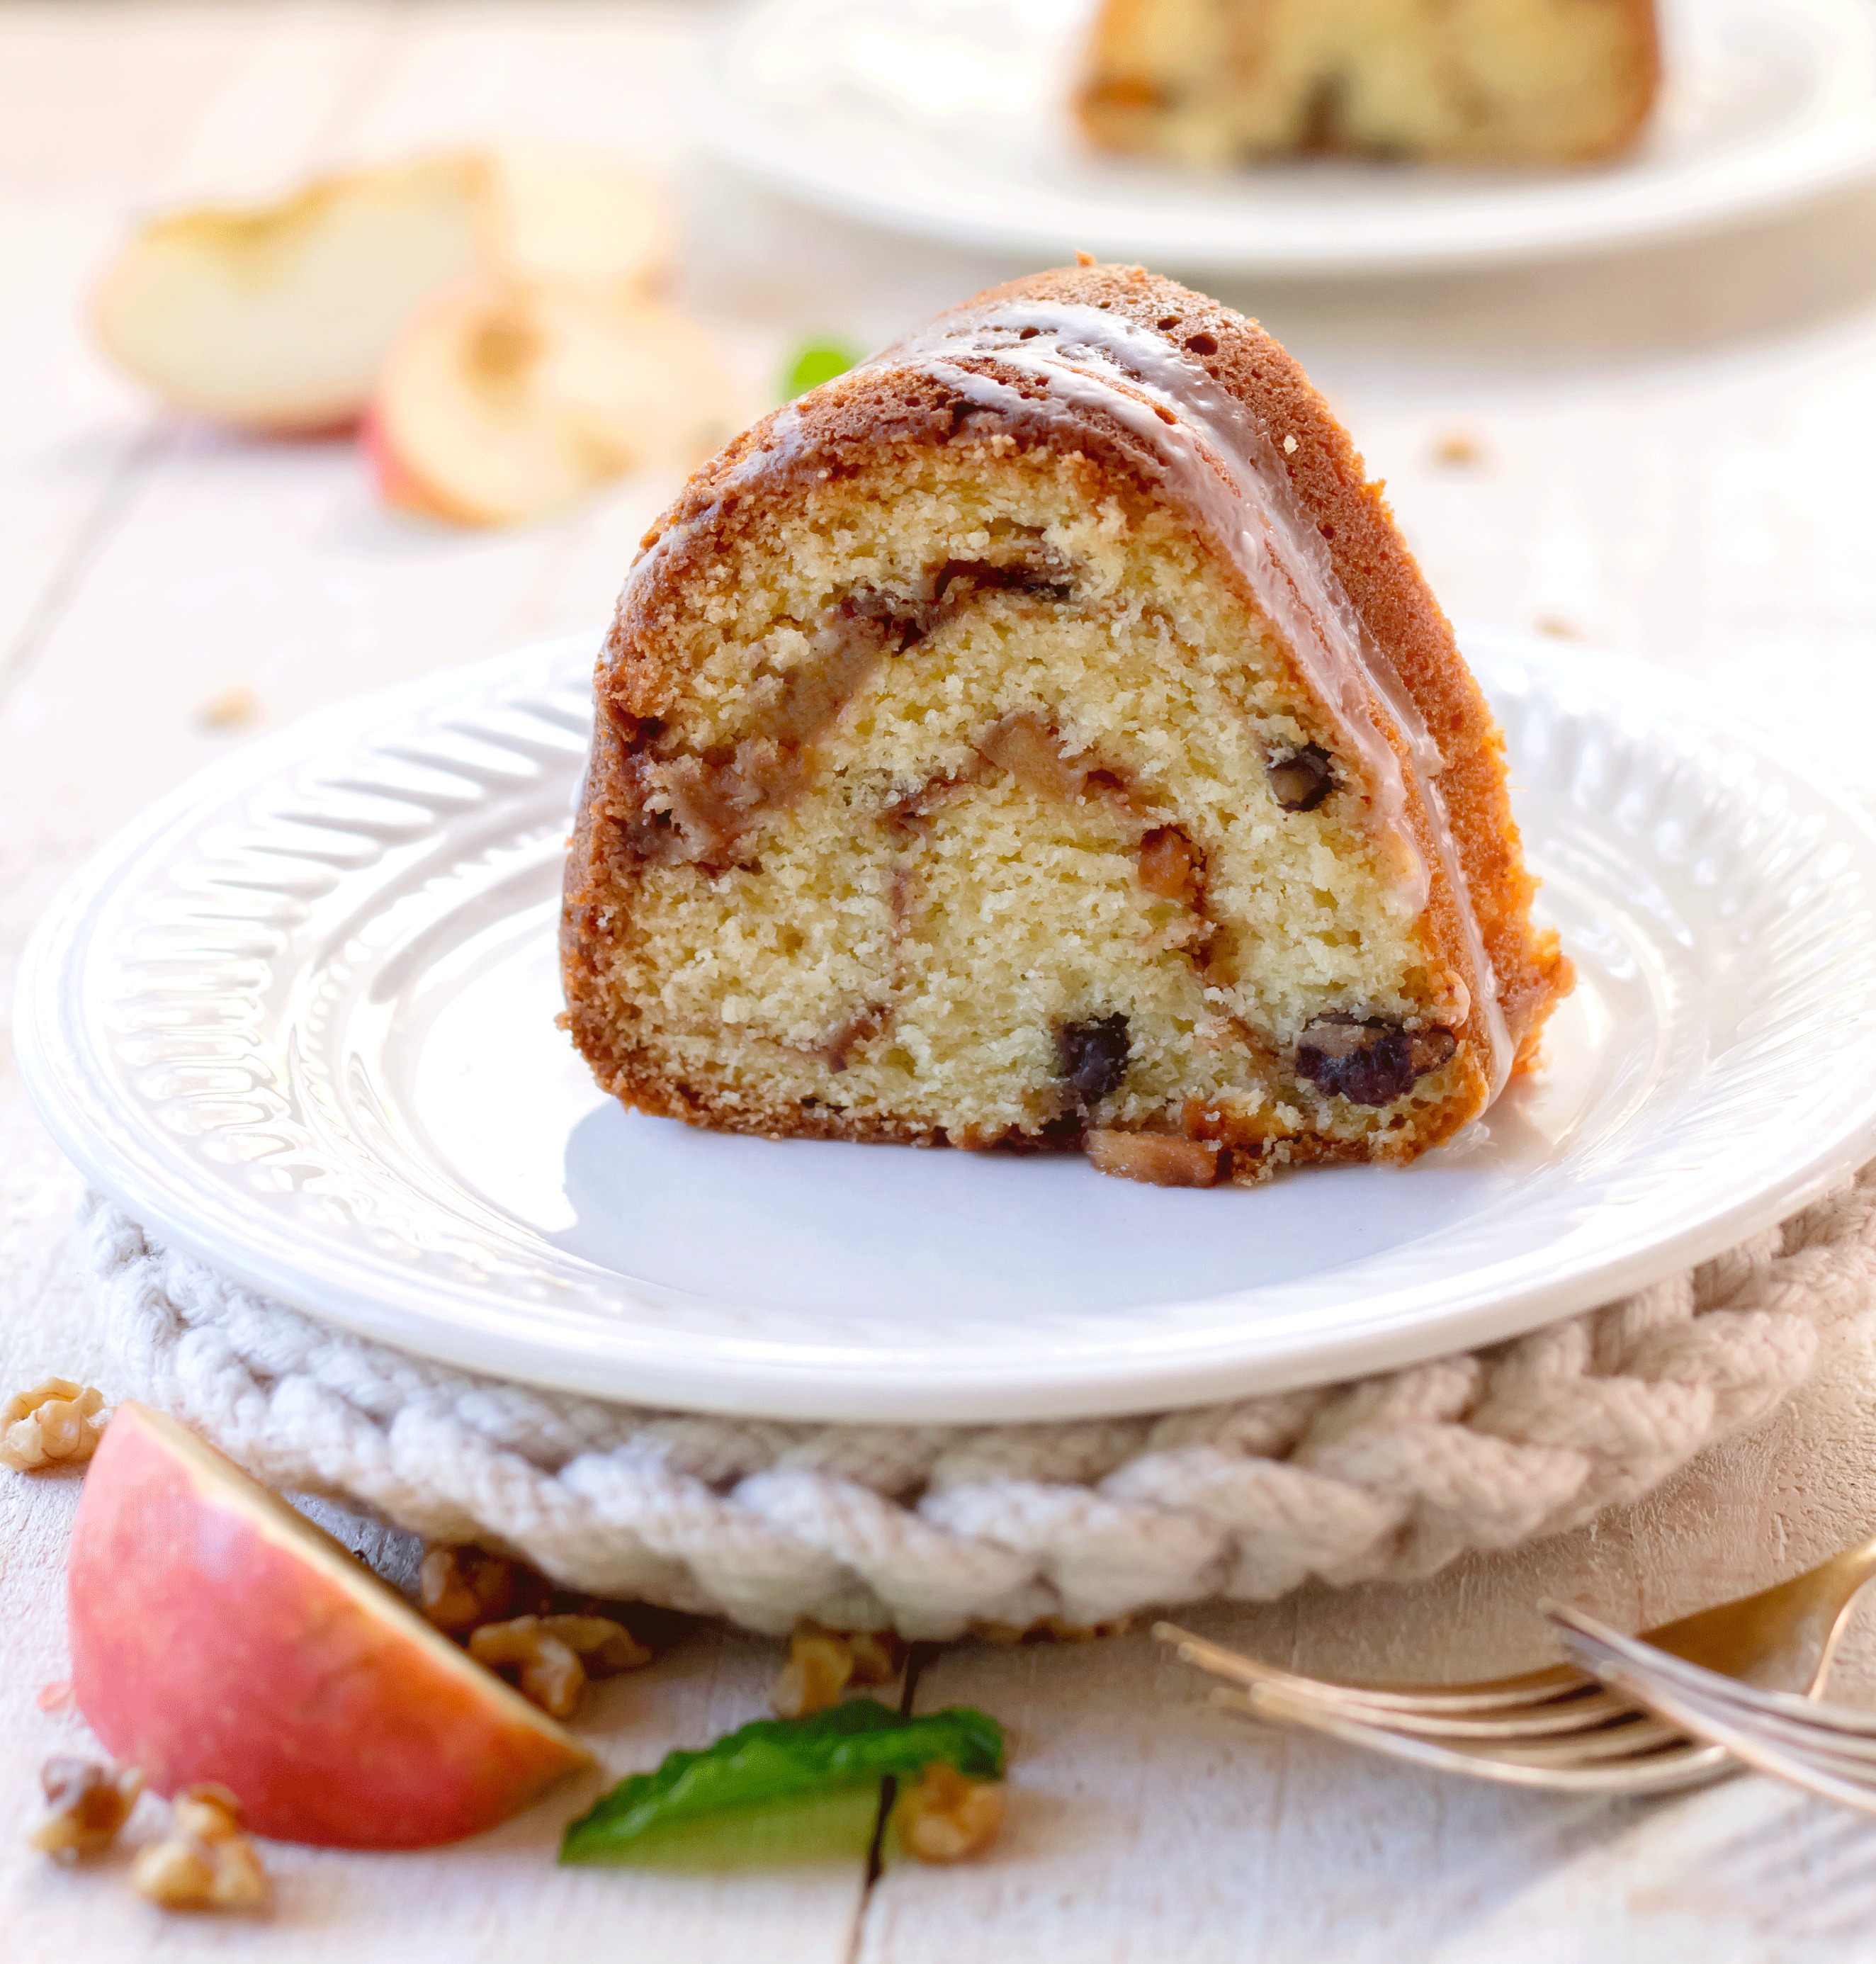 Old Fashioned Sour Cream Cake With Apple - Nut Filling